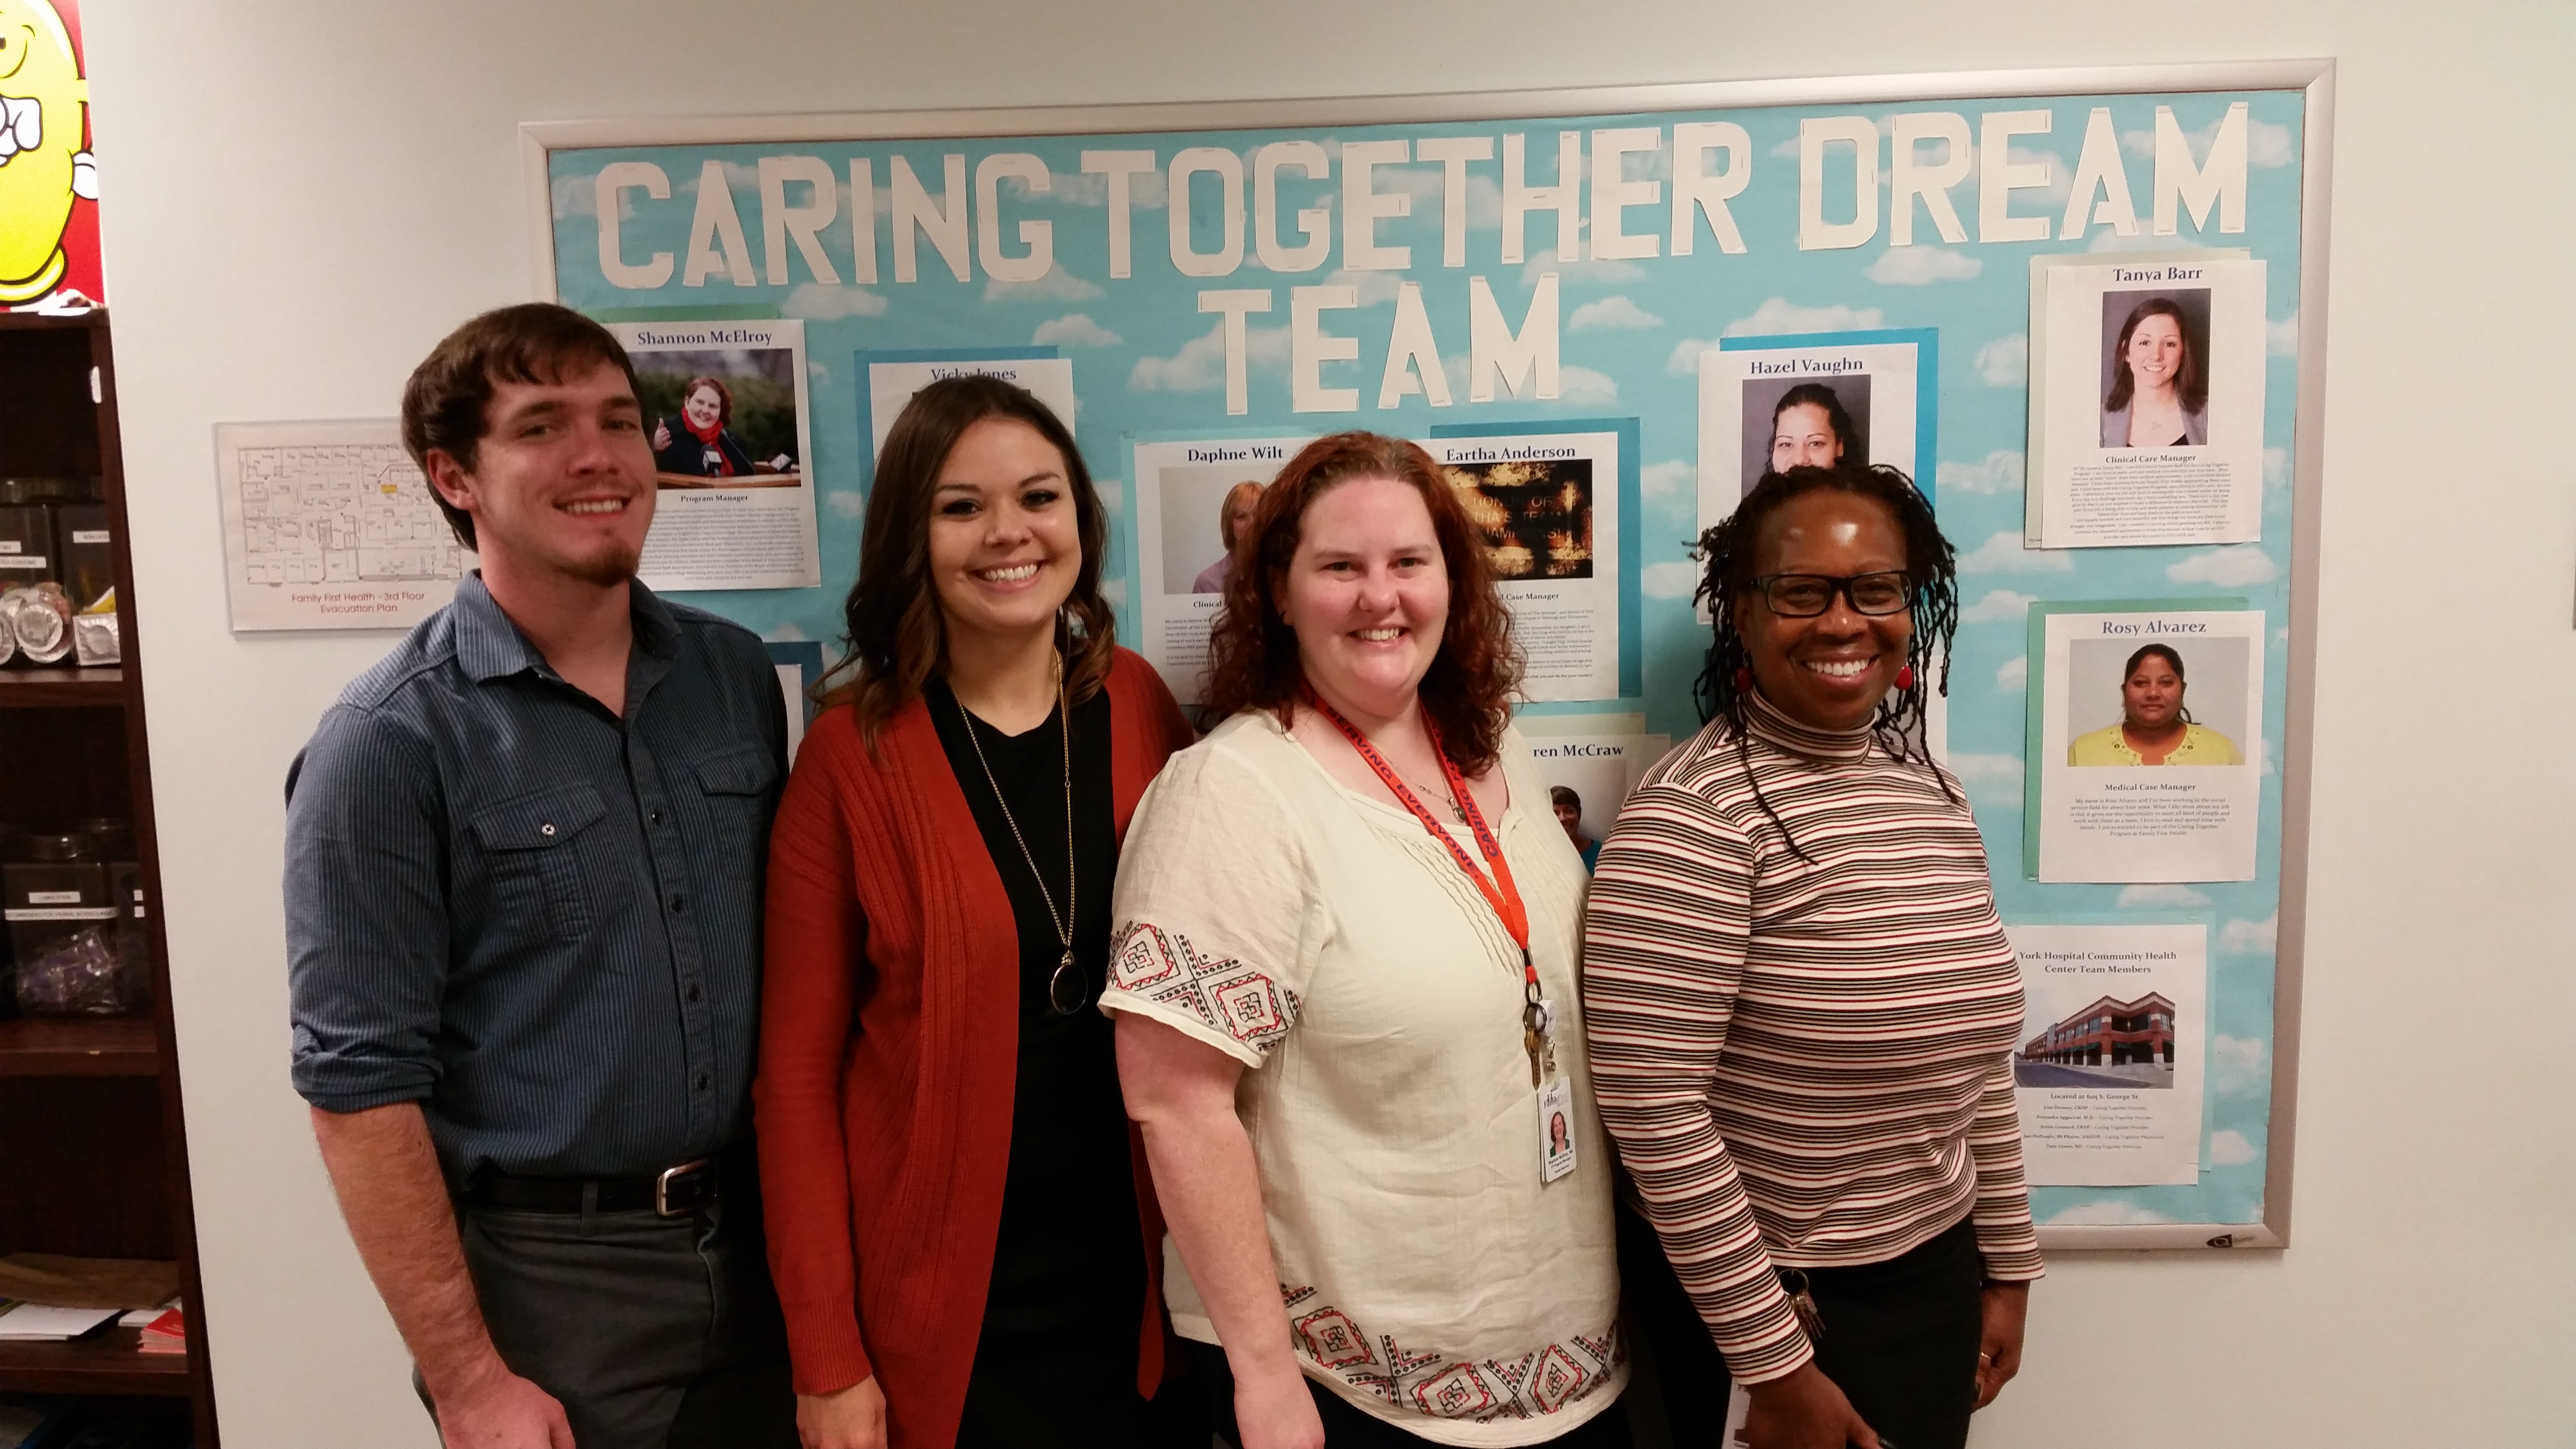 Caring Together staff